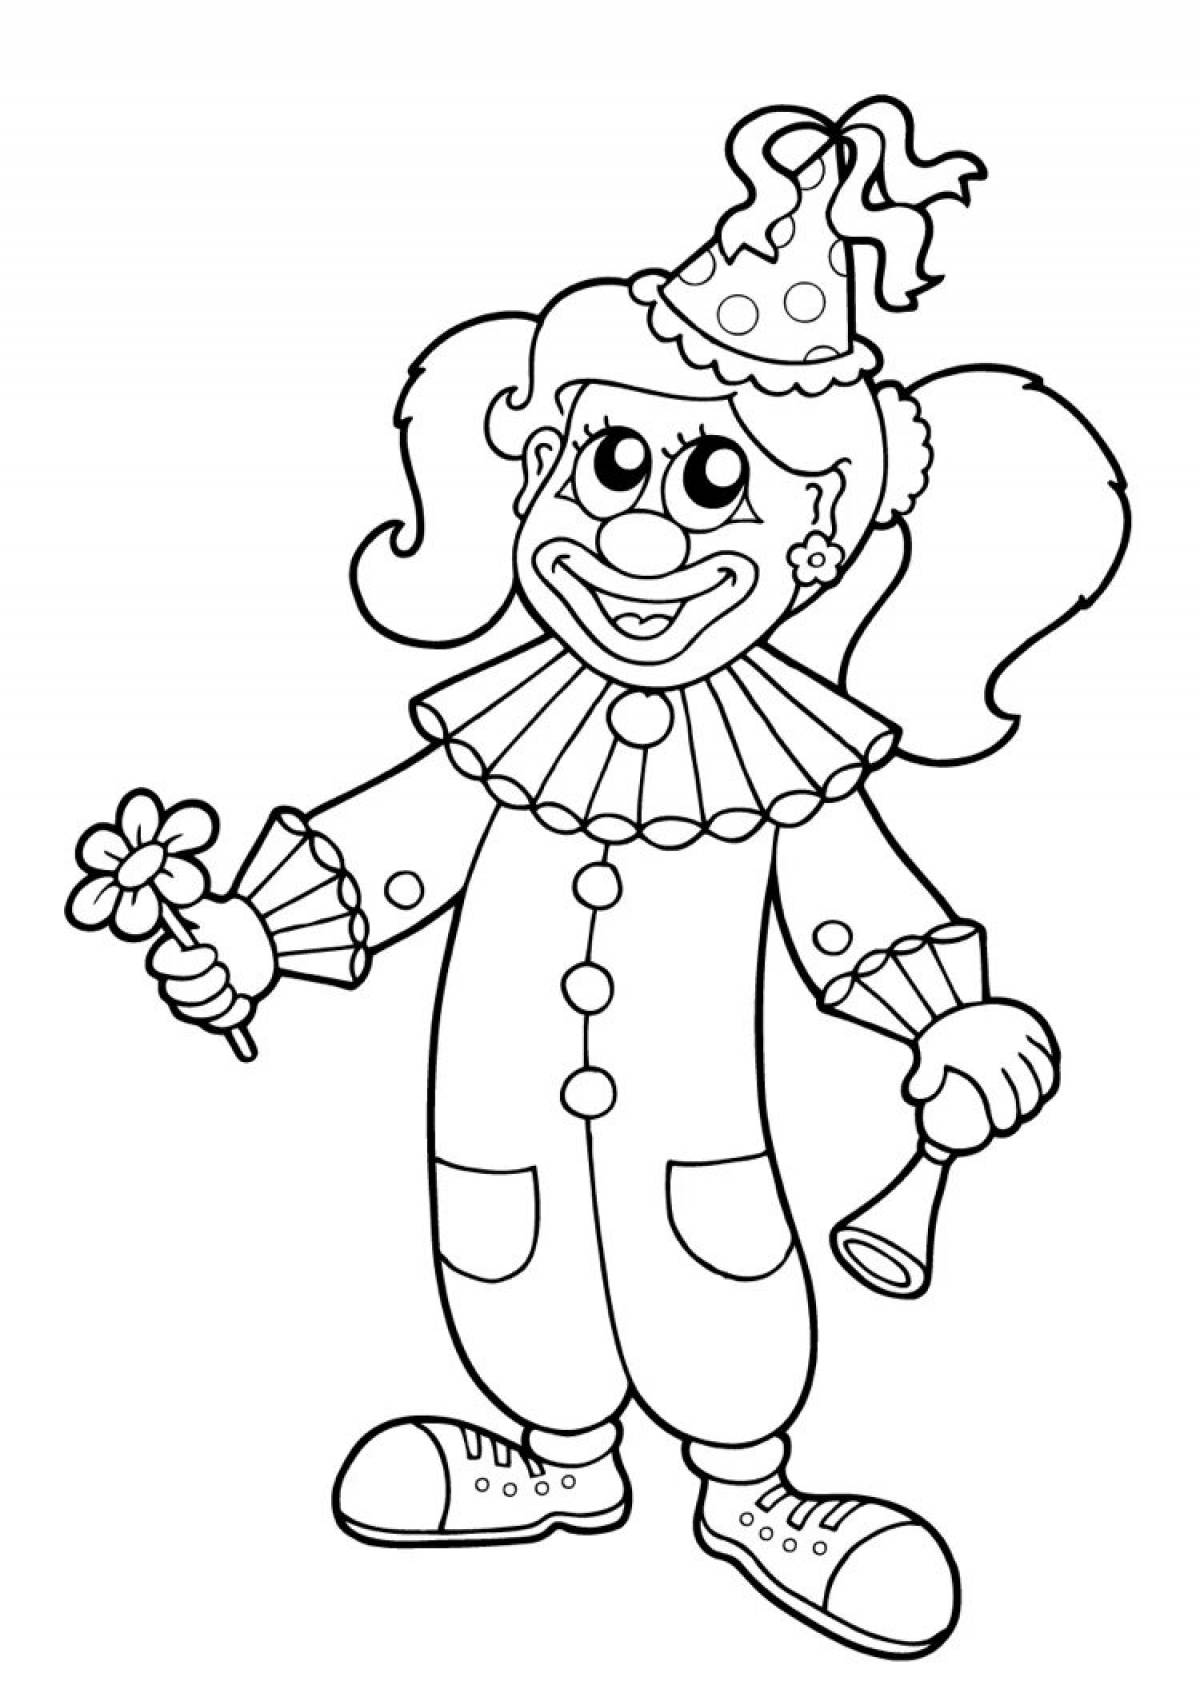 Shiny clown coloring for kids